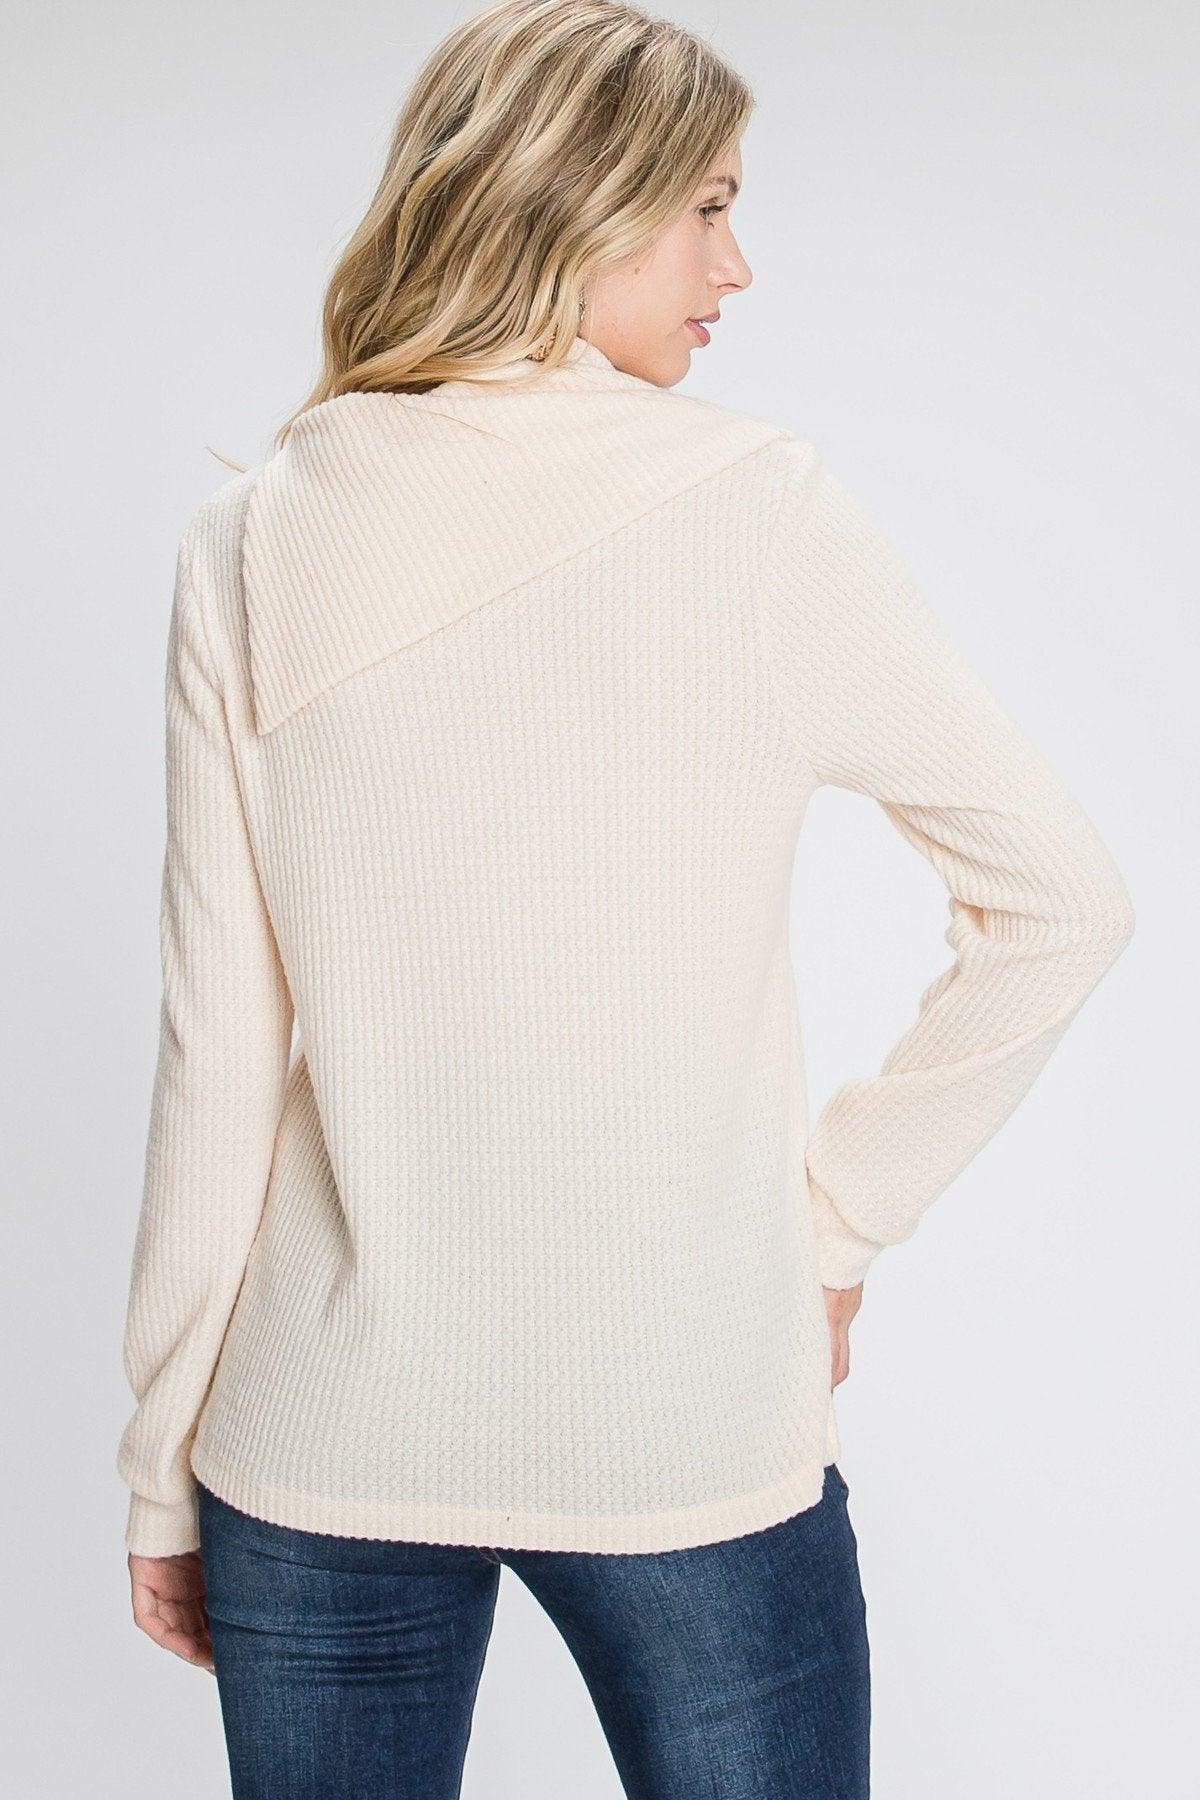 Buttoned Flap Mock Sweater Naughty Smile Fashion